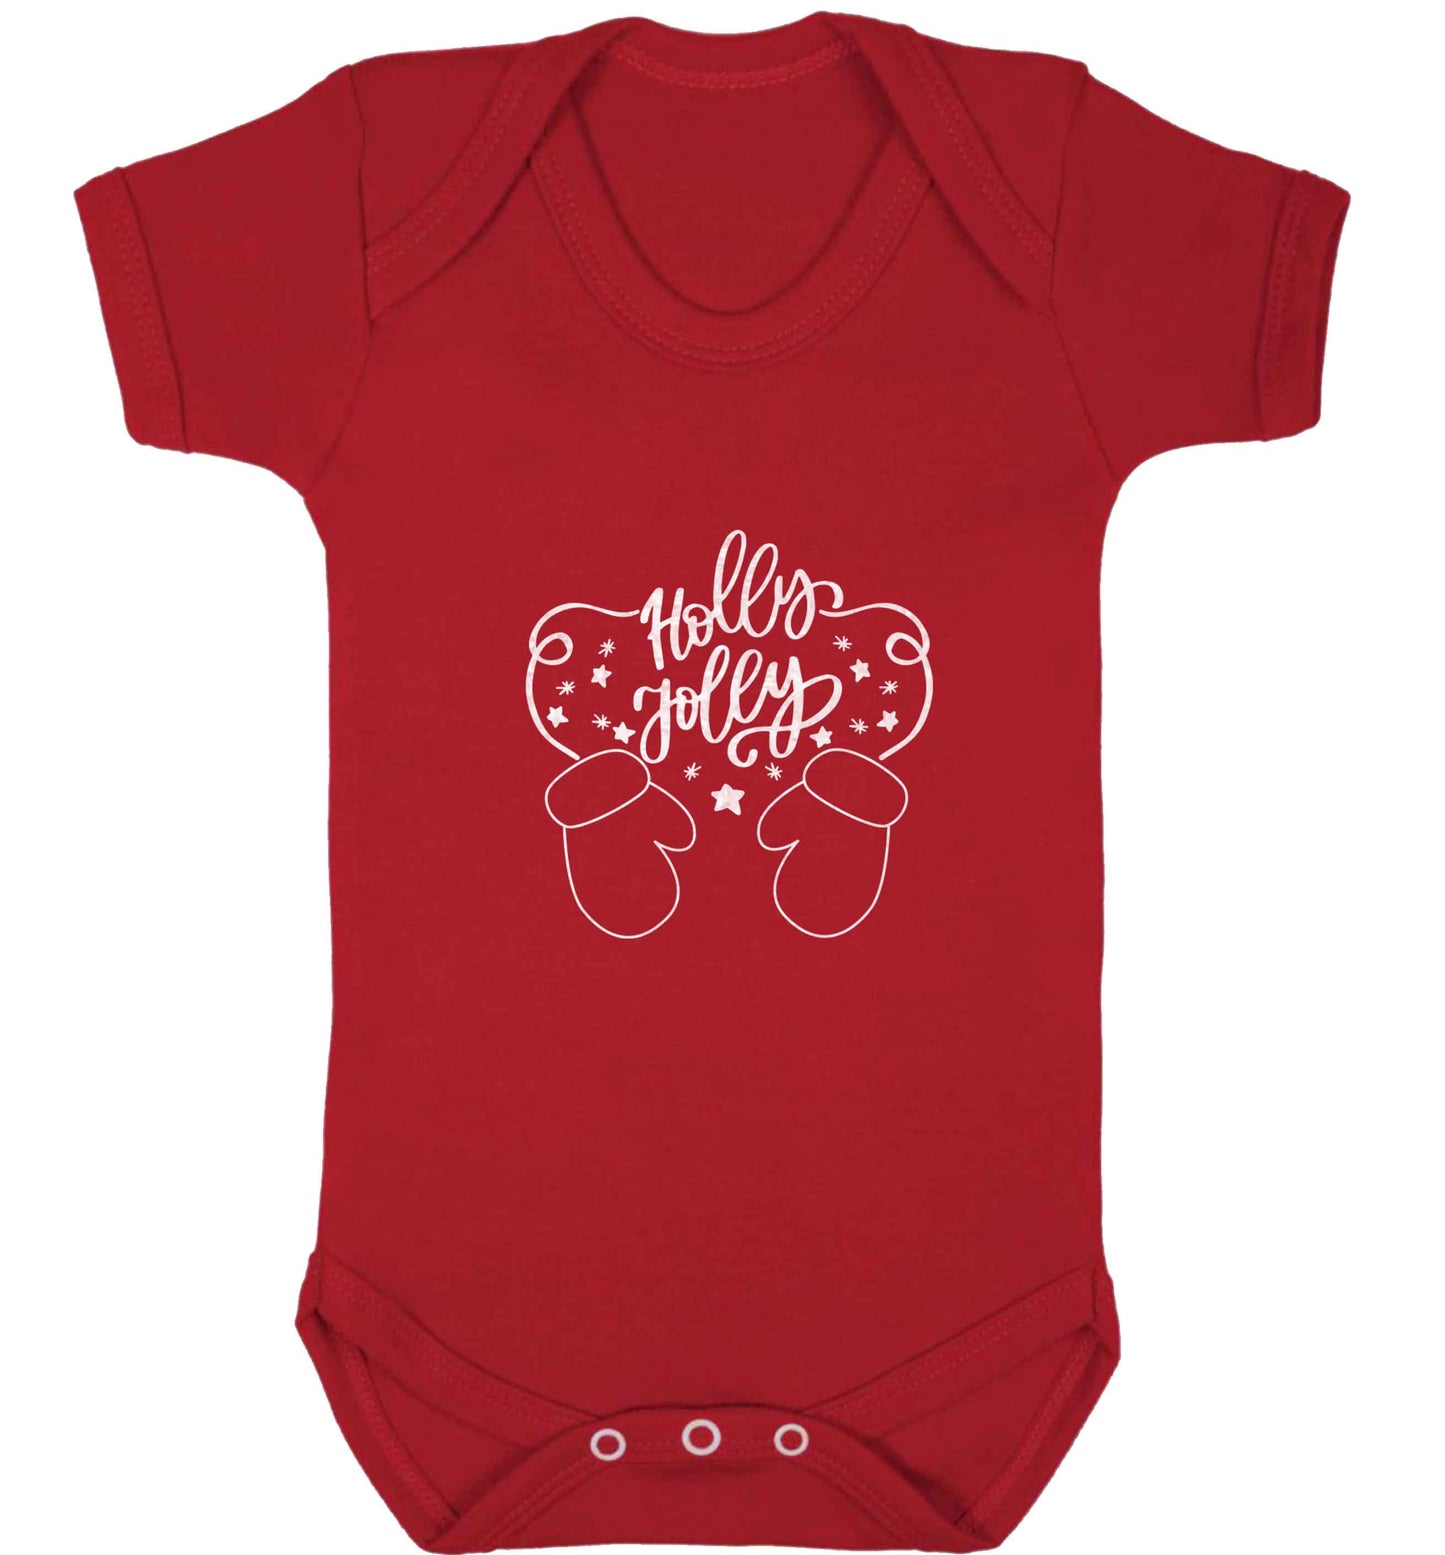 Holly jolly baby vest red 18-24 months